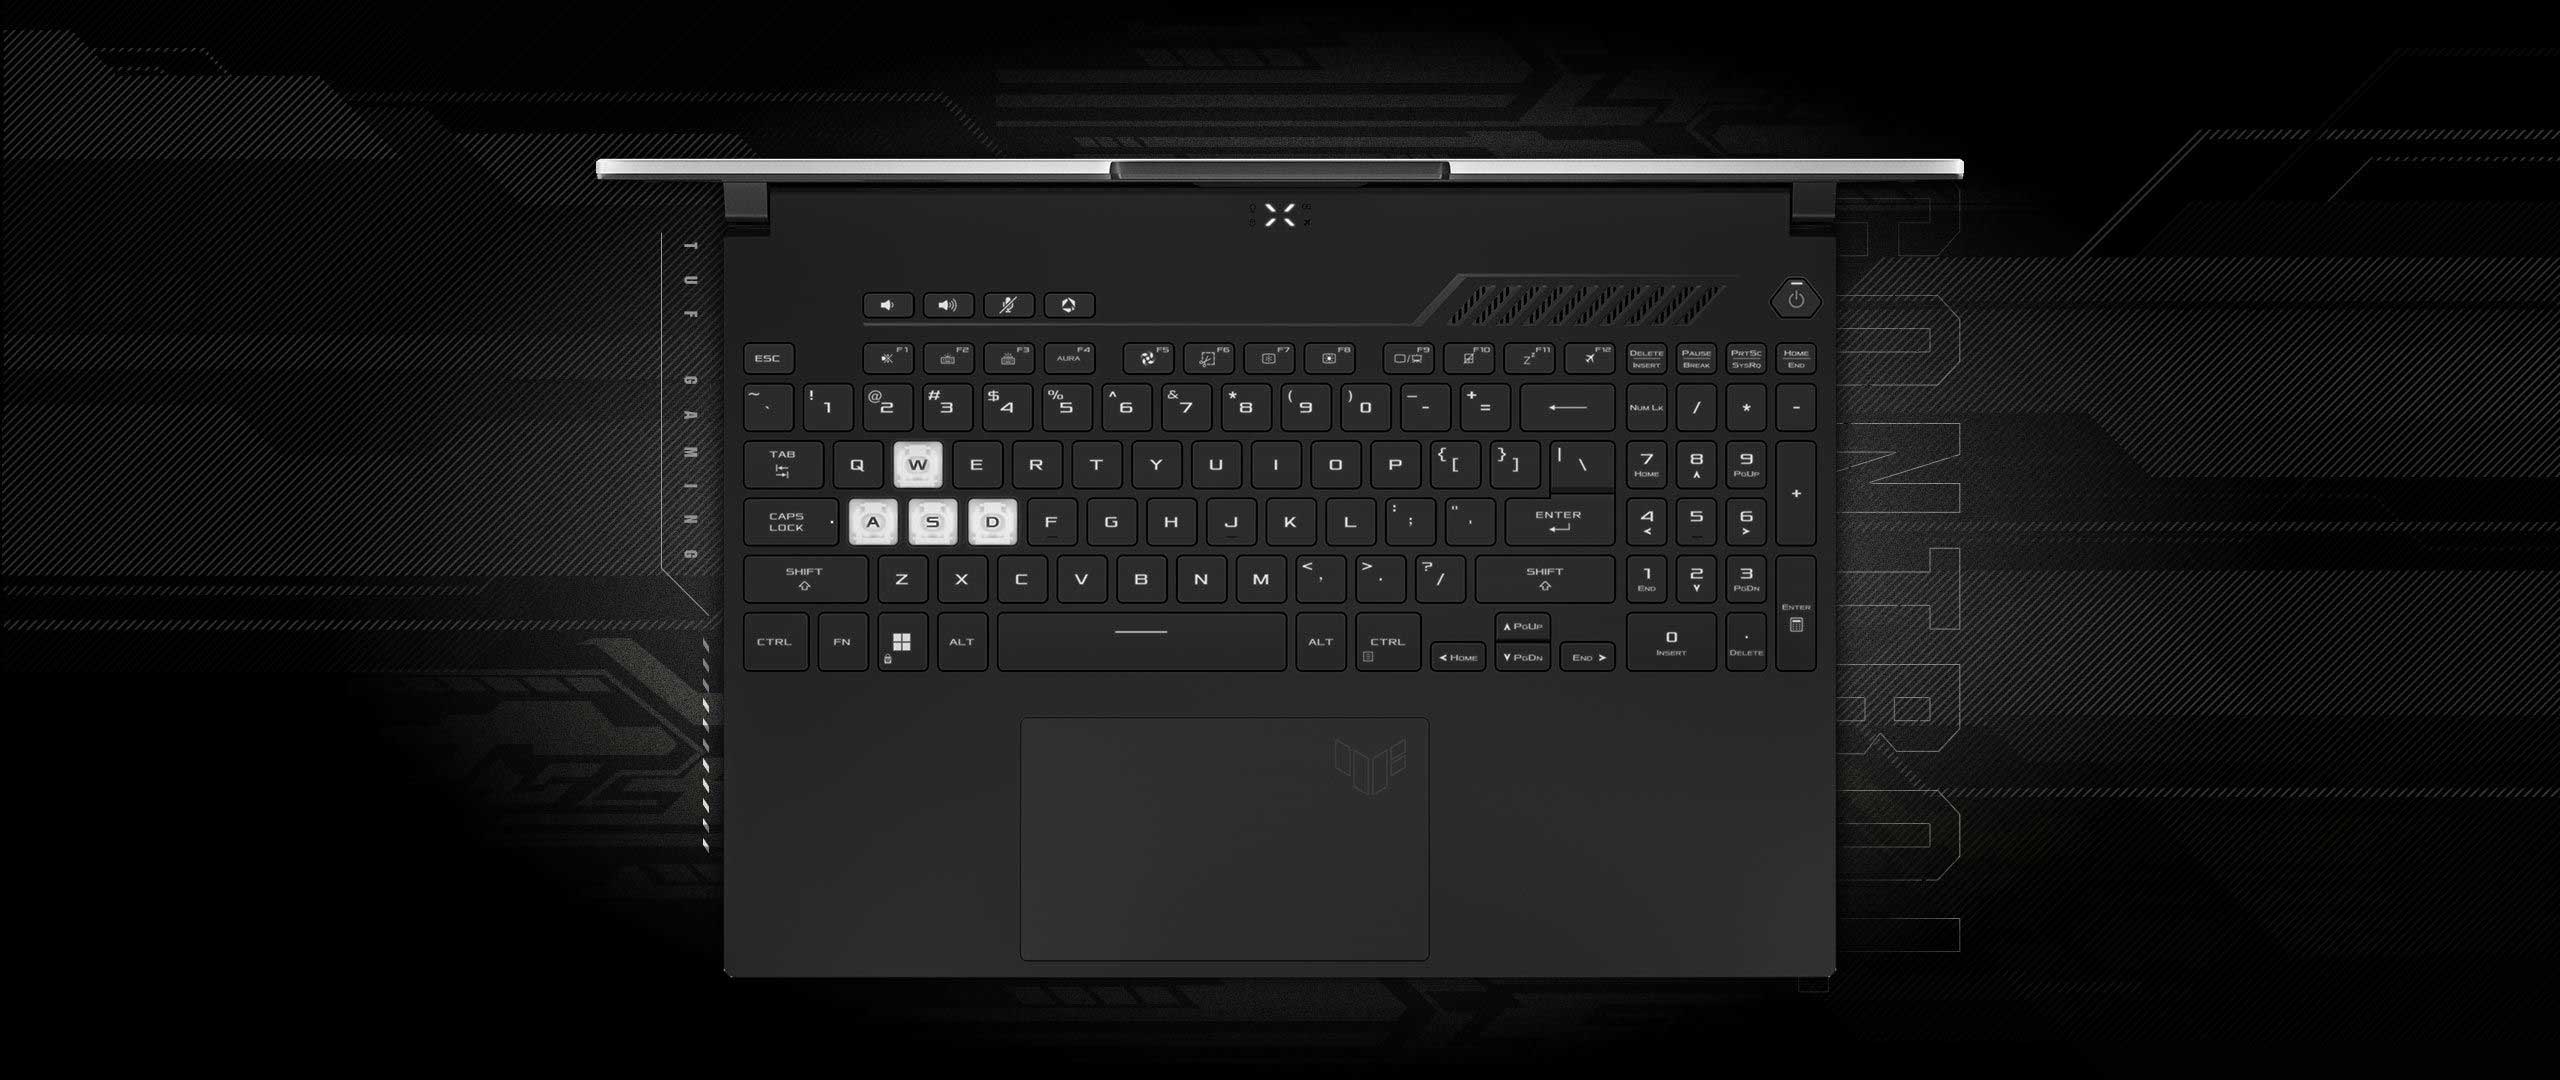 The image shows the keyboard and touchpad of ASUS TUF DASH F15 on control section